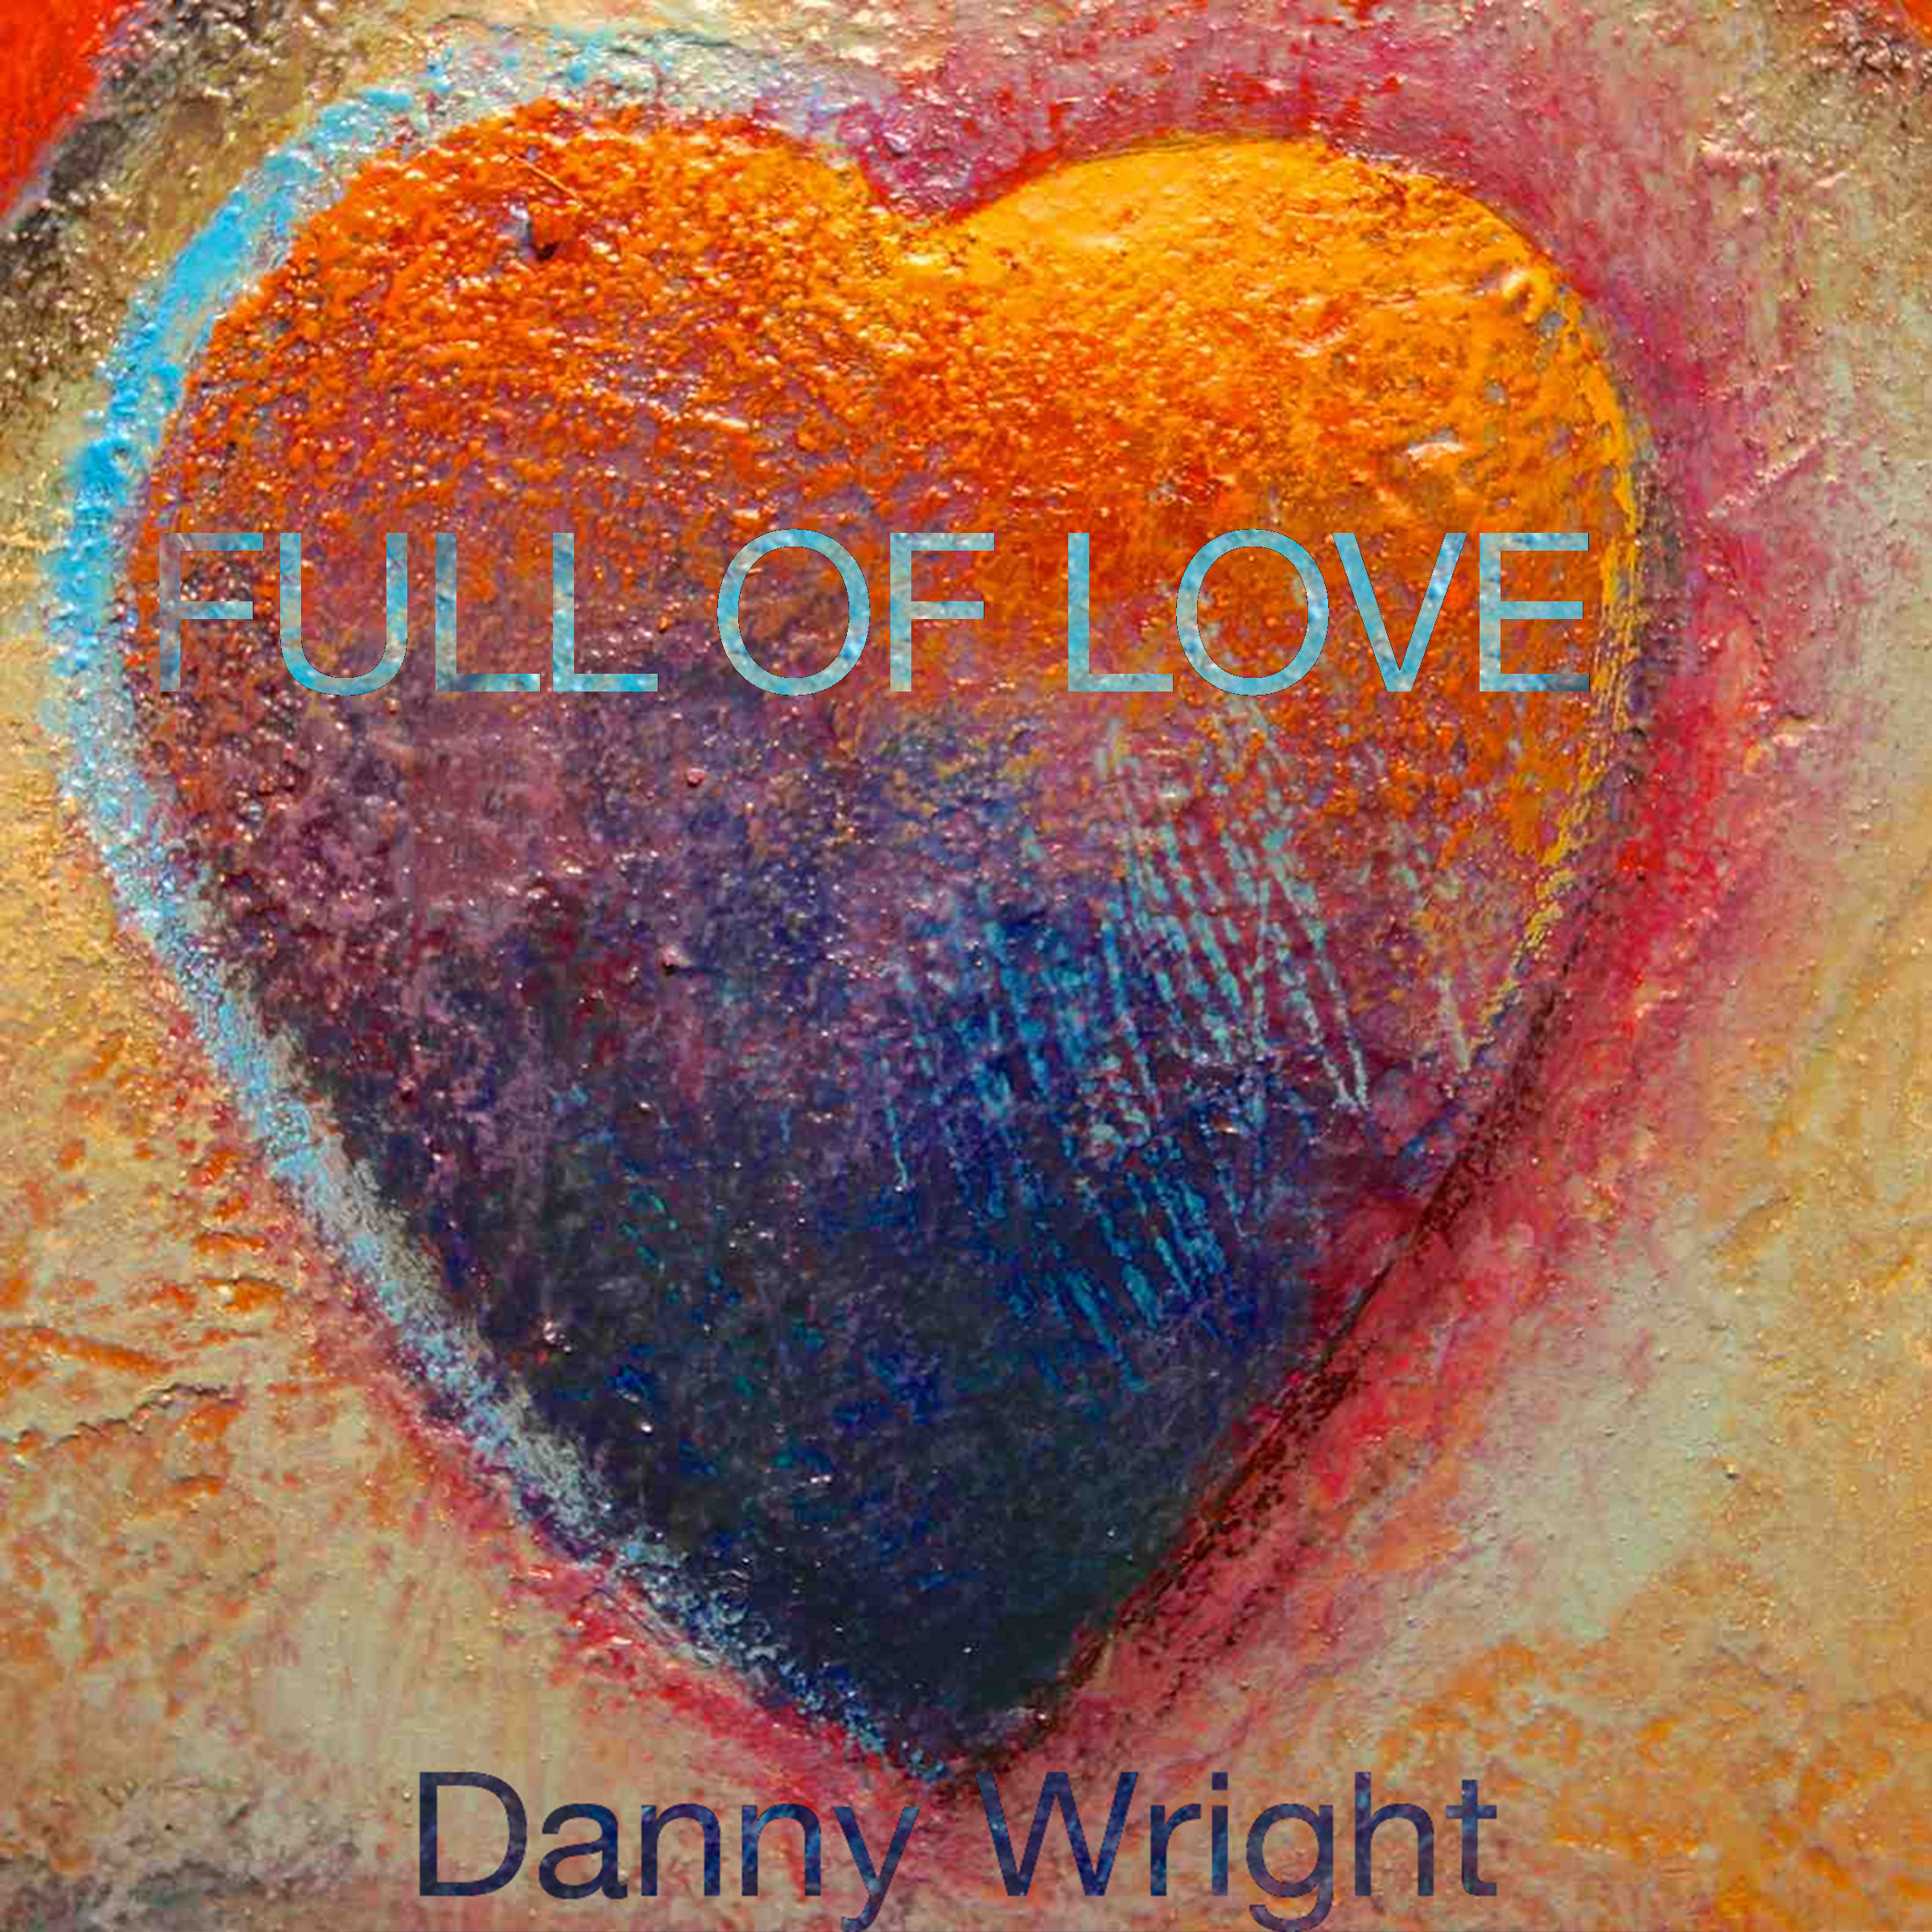 Full of Love by Danny Wright